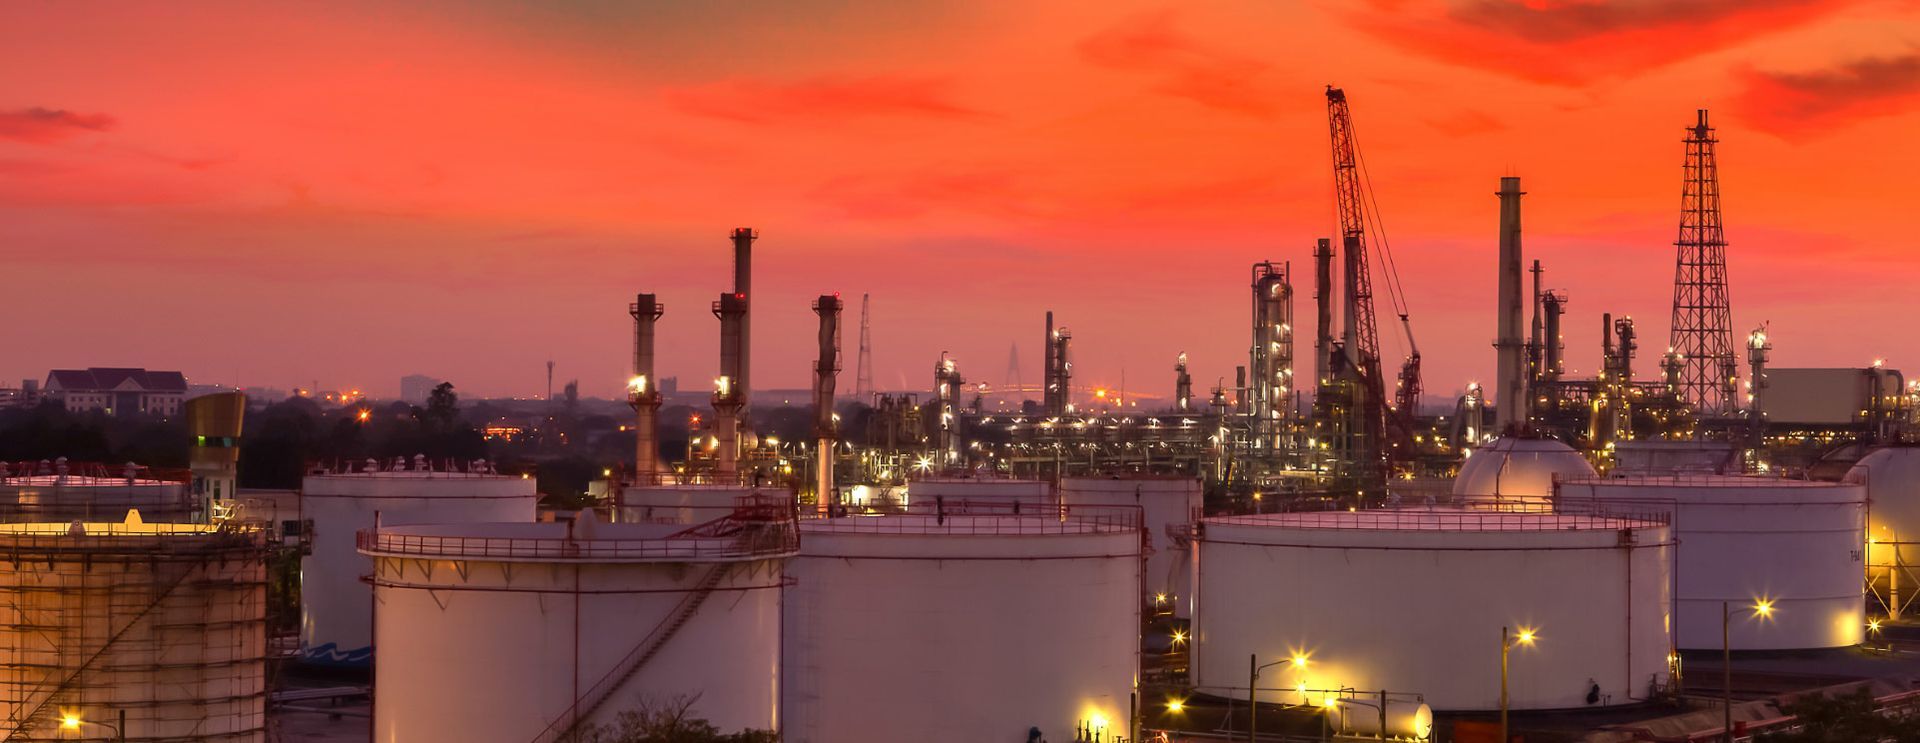 A large oil refinery is lit up at night with a sunset in the background.